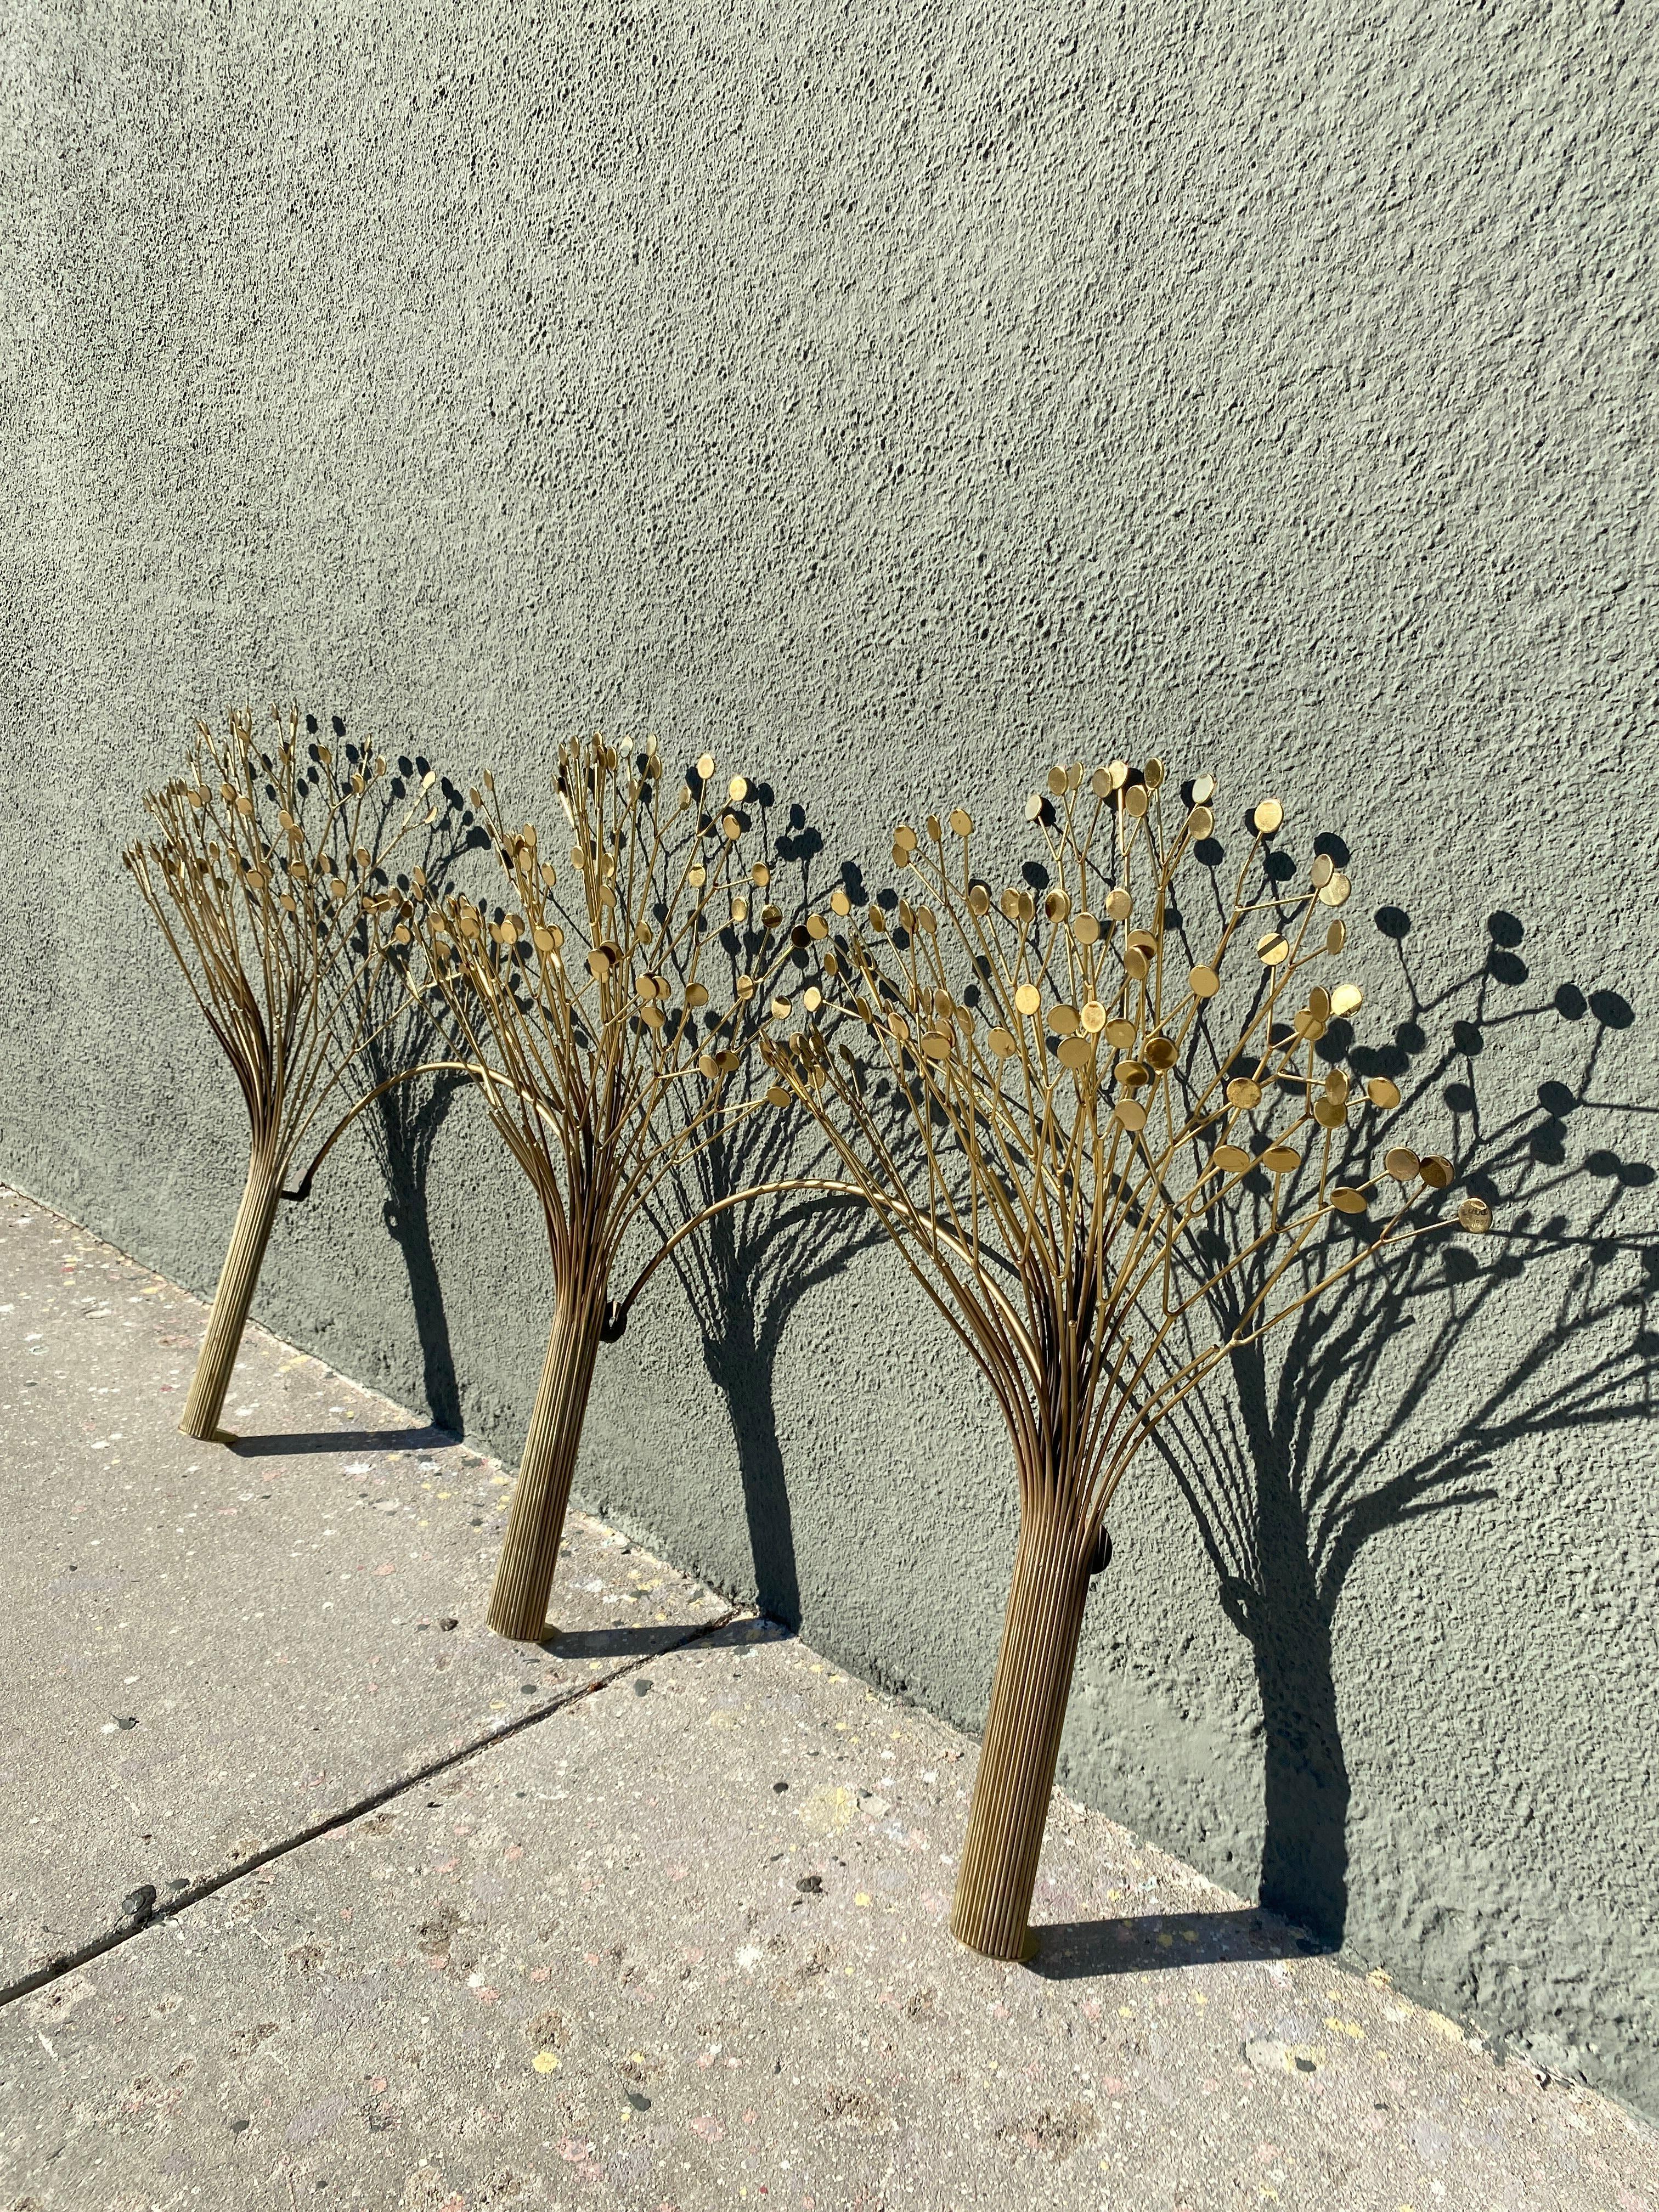 Brass rods make up three trees with teardrop-shaped leaves that shimmer with reflected light. Each ‘tree’ has a wall hook to keep the sculpture very sturdy and straight.

Circa 1970s.

Measures: 34”H x 66”W x 12”D.